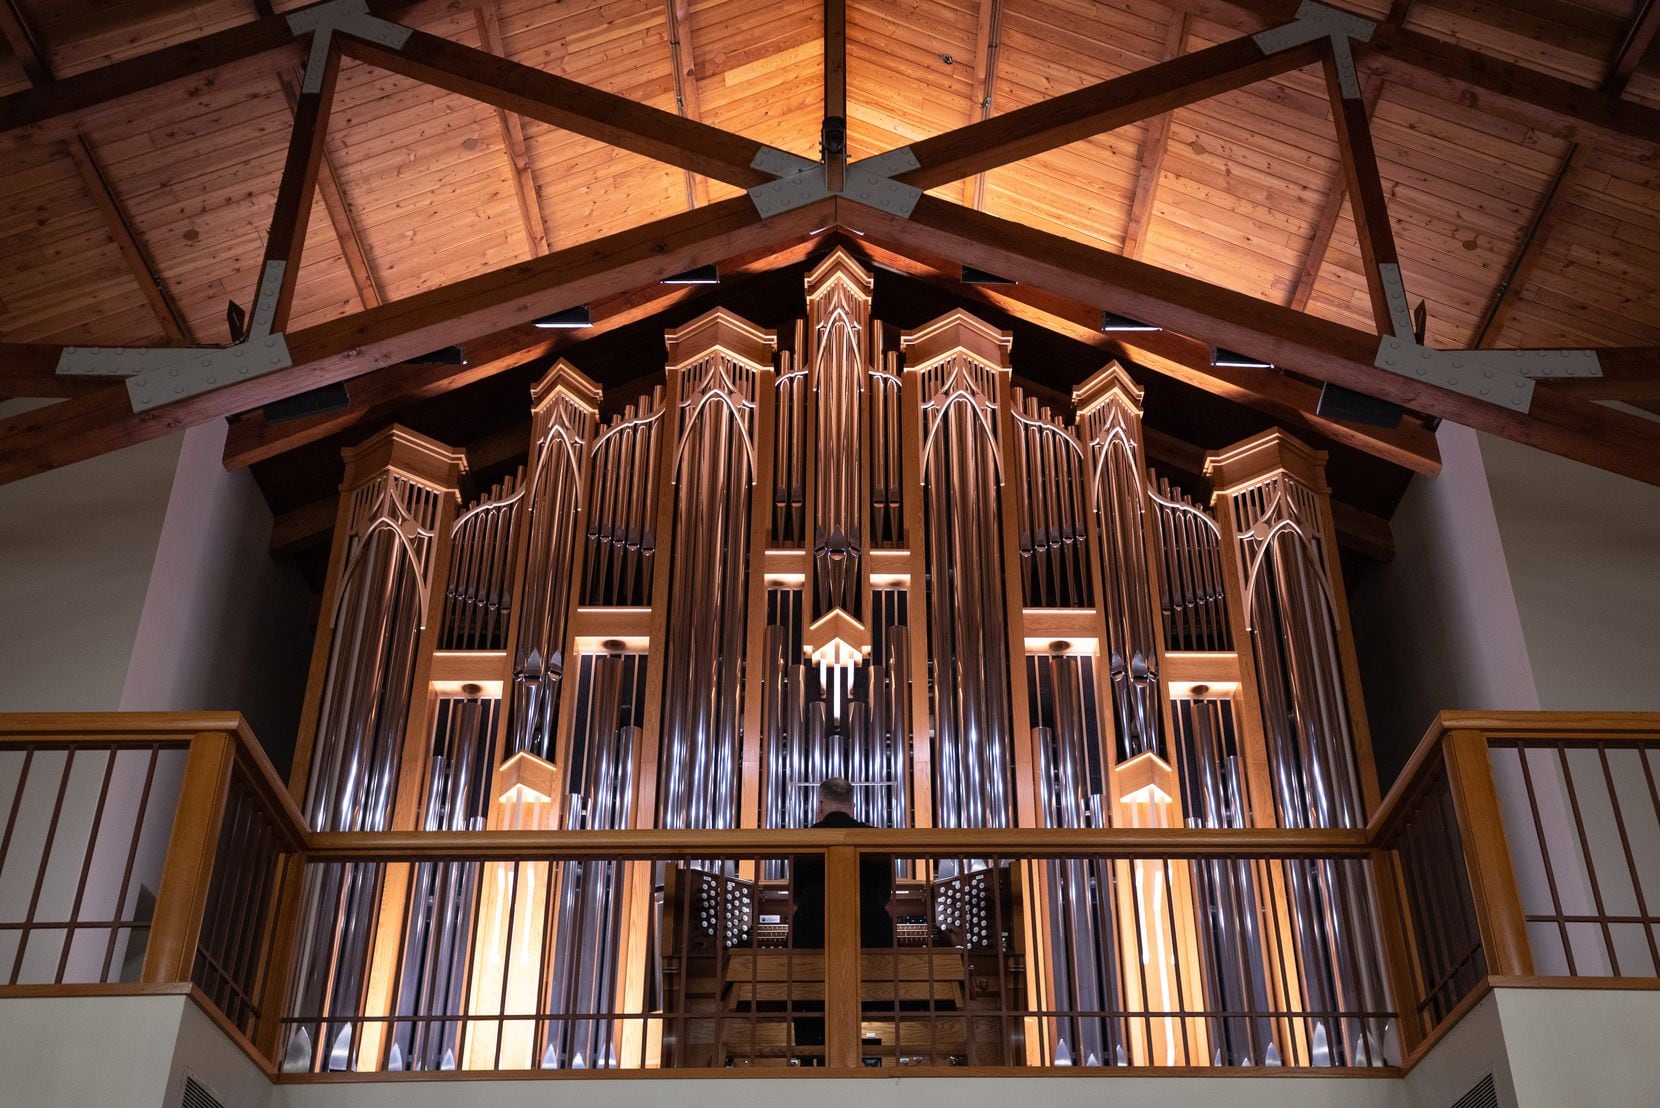 Organist Jeremy David Tarrant performs as part of the Robert T. Anderson Recital Series at...